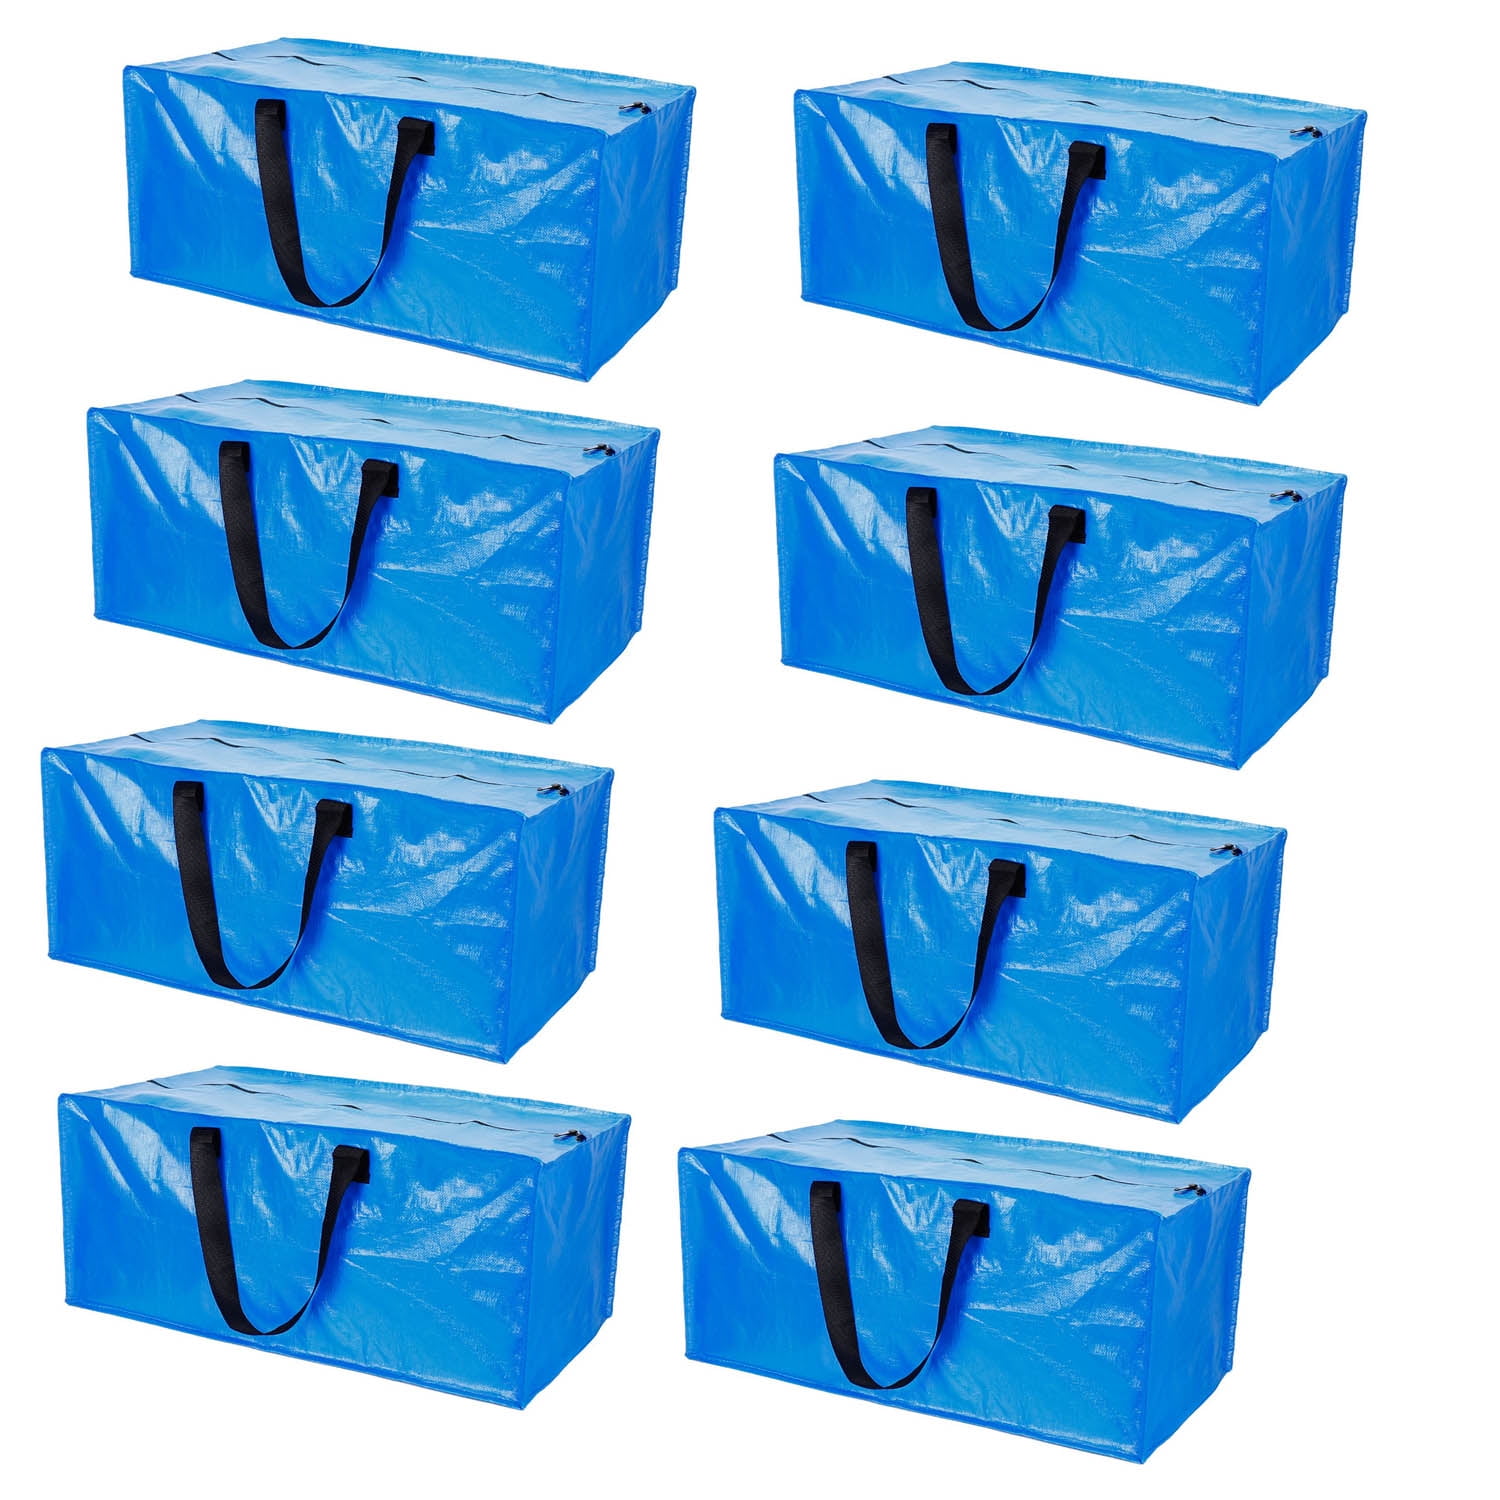 Dropship 4Pcs Moving Bags Heavy Duty Container Reusable Plastic Totes Blue  Moving Bin Zippered Storage Bag to Sell Online at a Lower Price